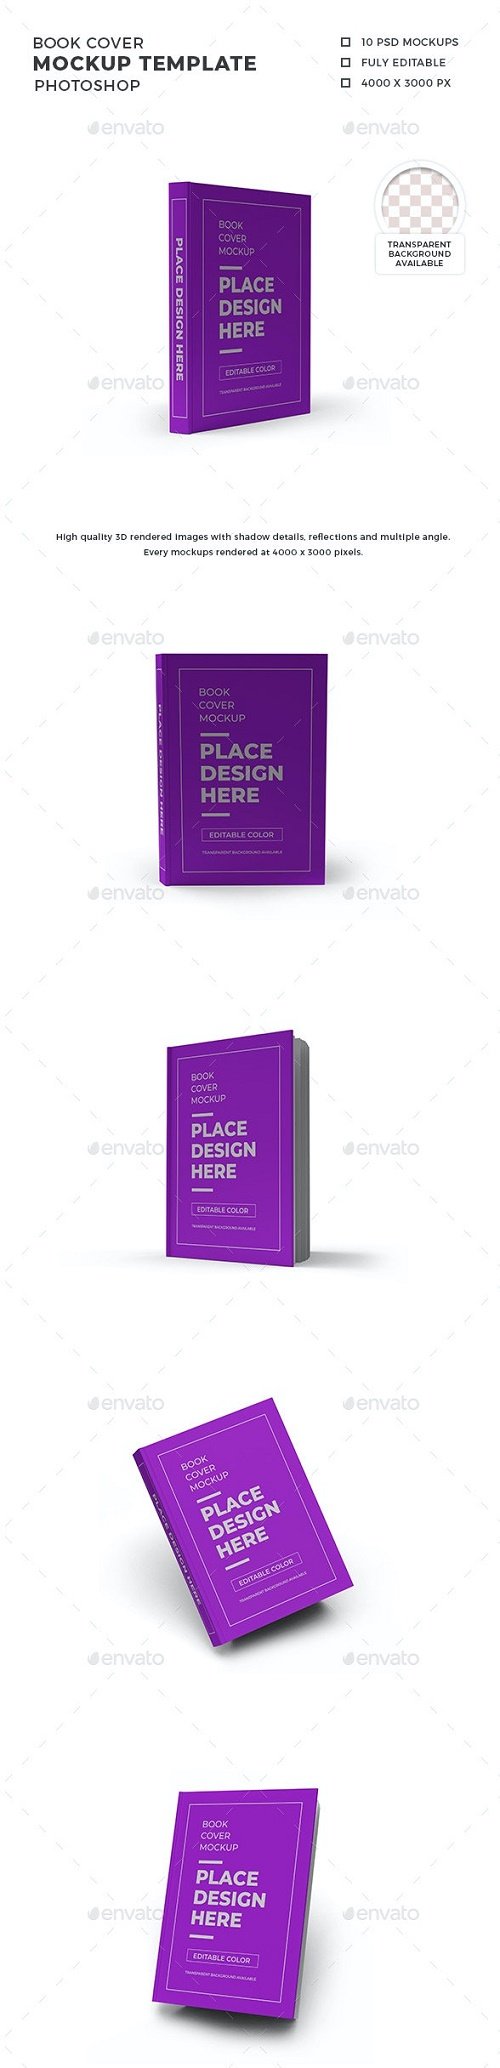 Book Cover Mockup Template Set - 30263942